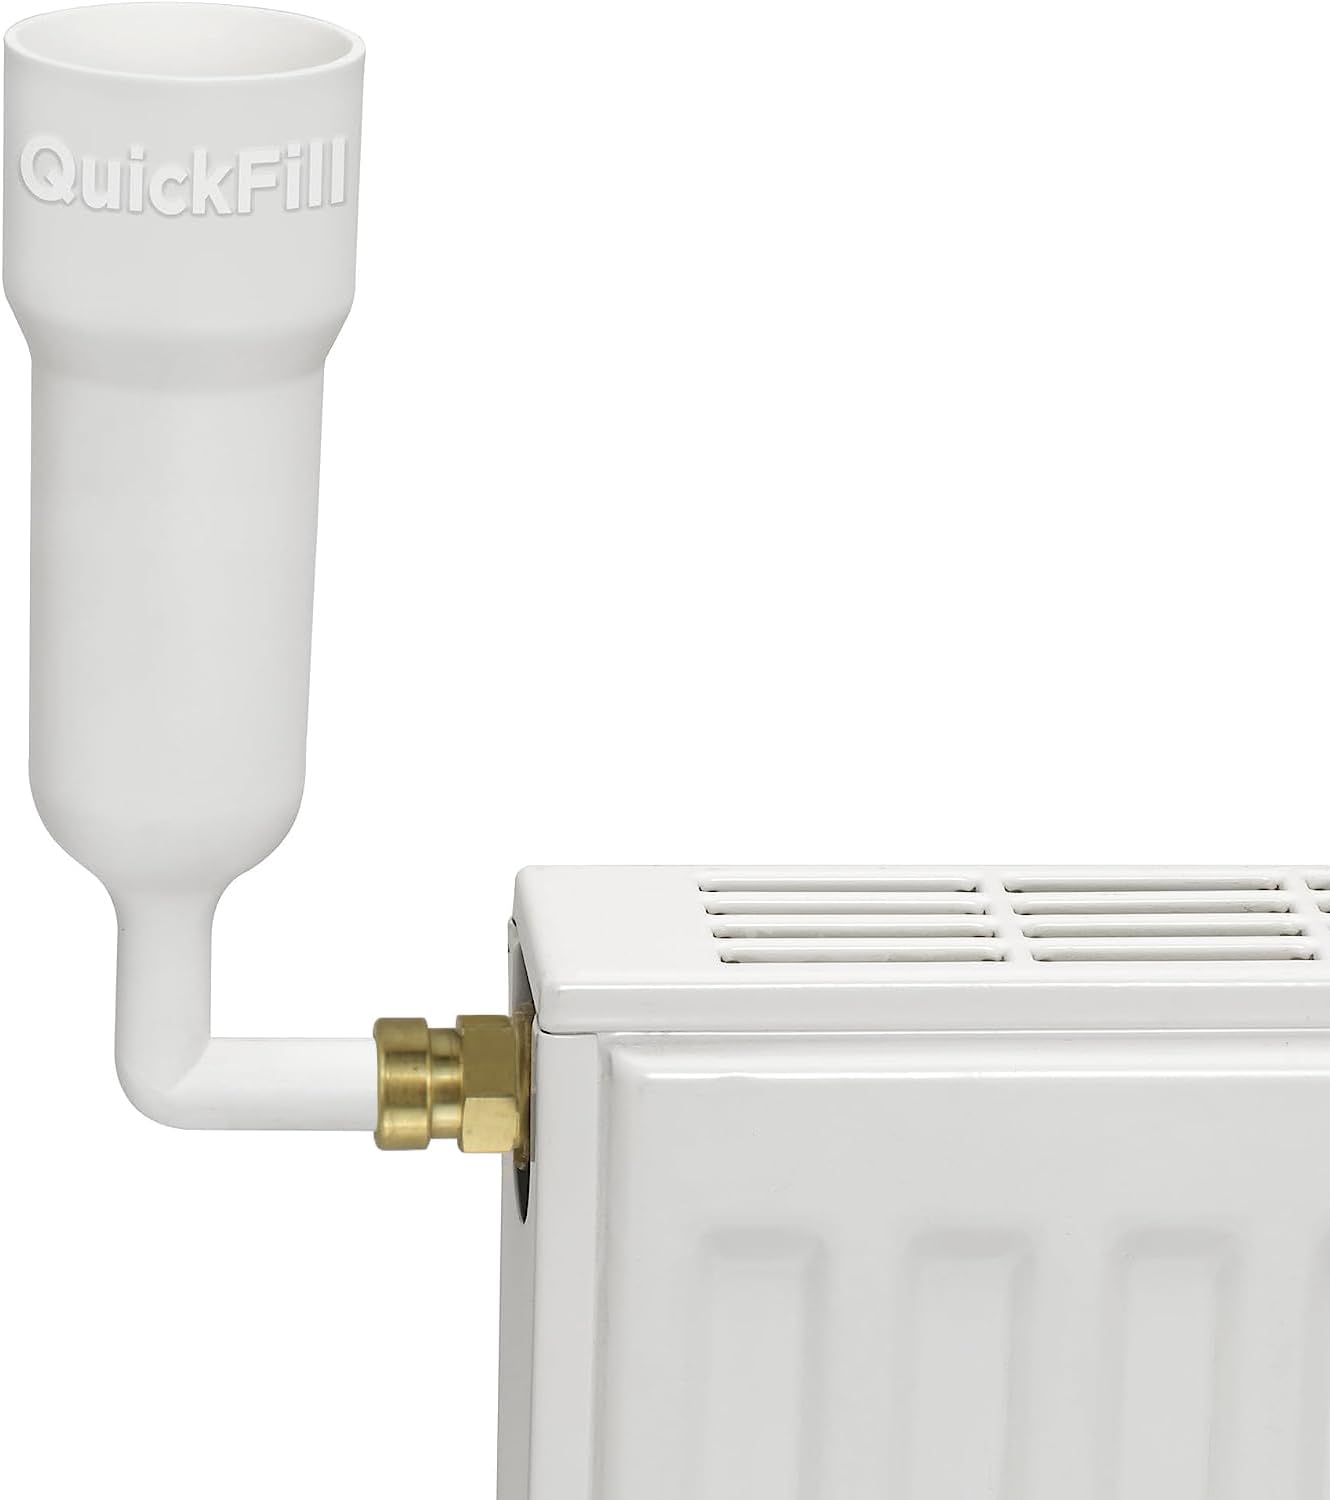 QuickFill - Central Heating Dosing Tool - Type